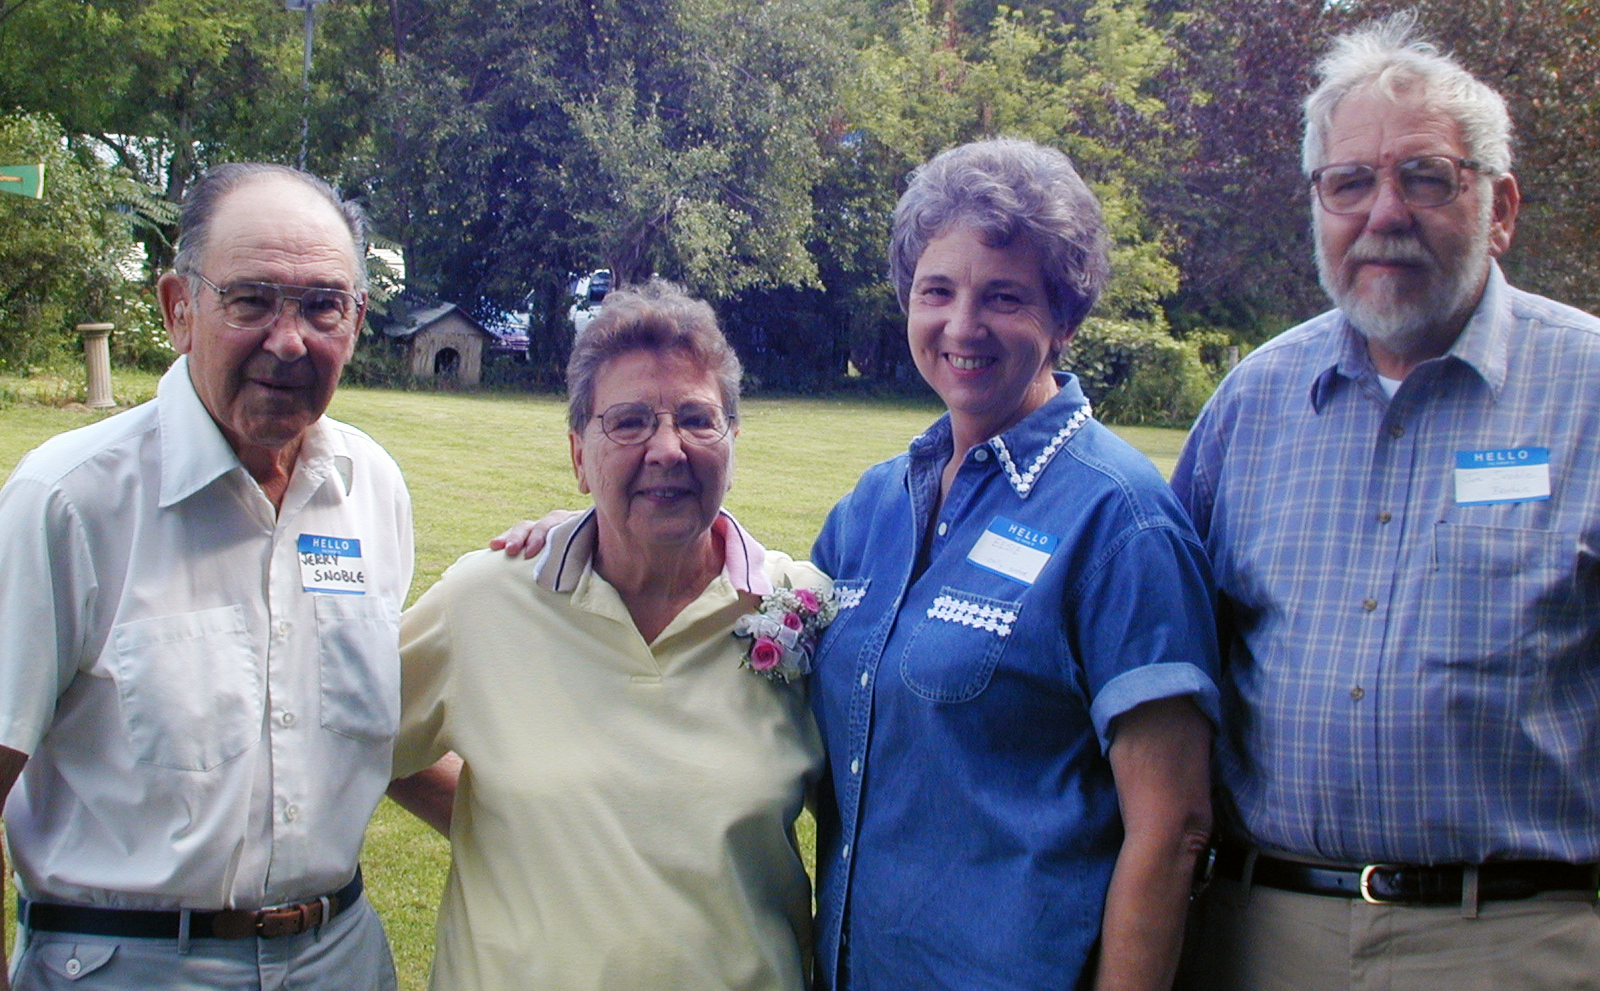 Photo of Mom with Uncle Jerry Snoble, Aunt Elsie Walker, and Joe Snoble